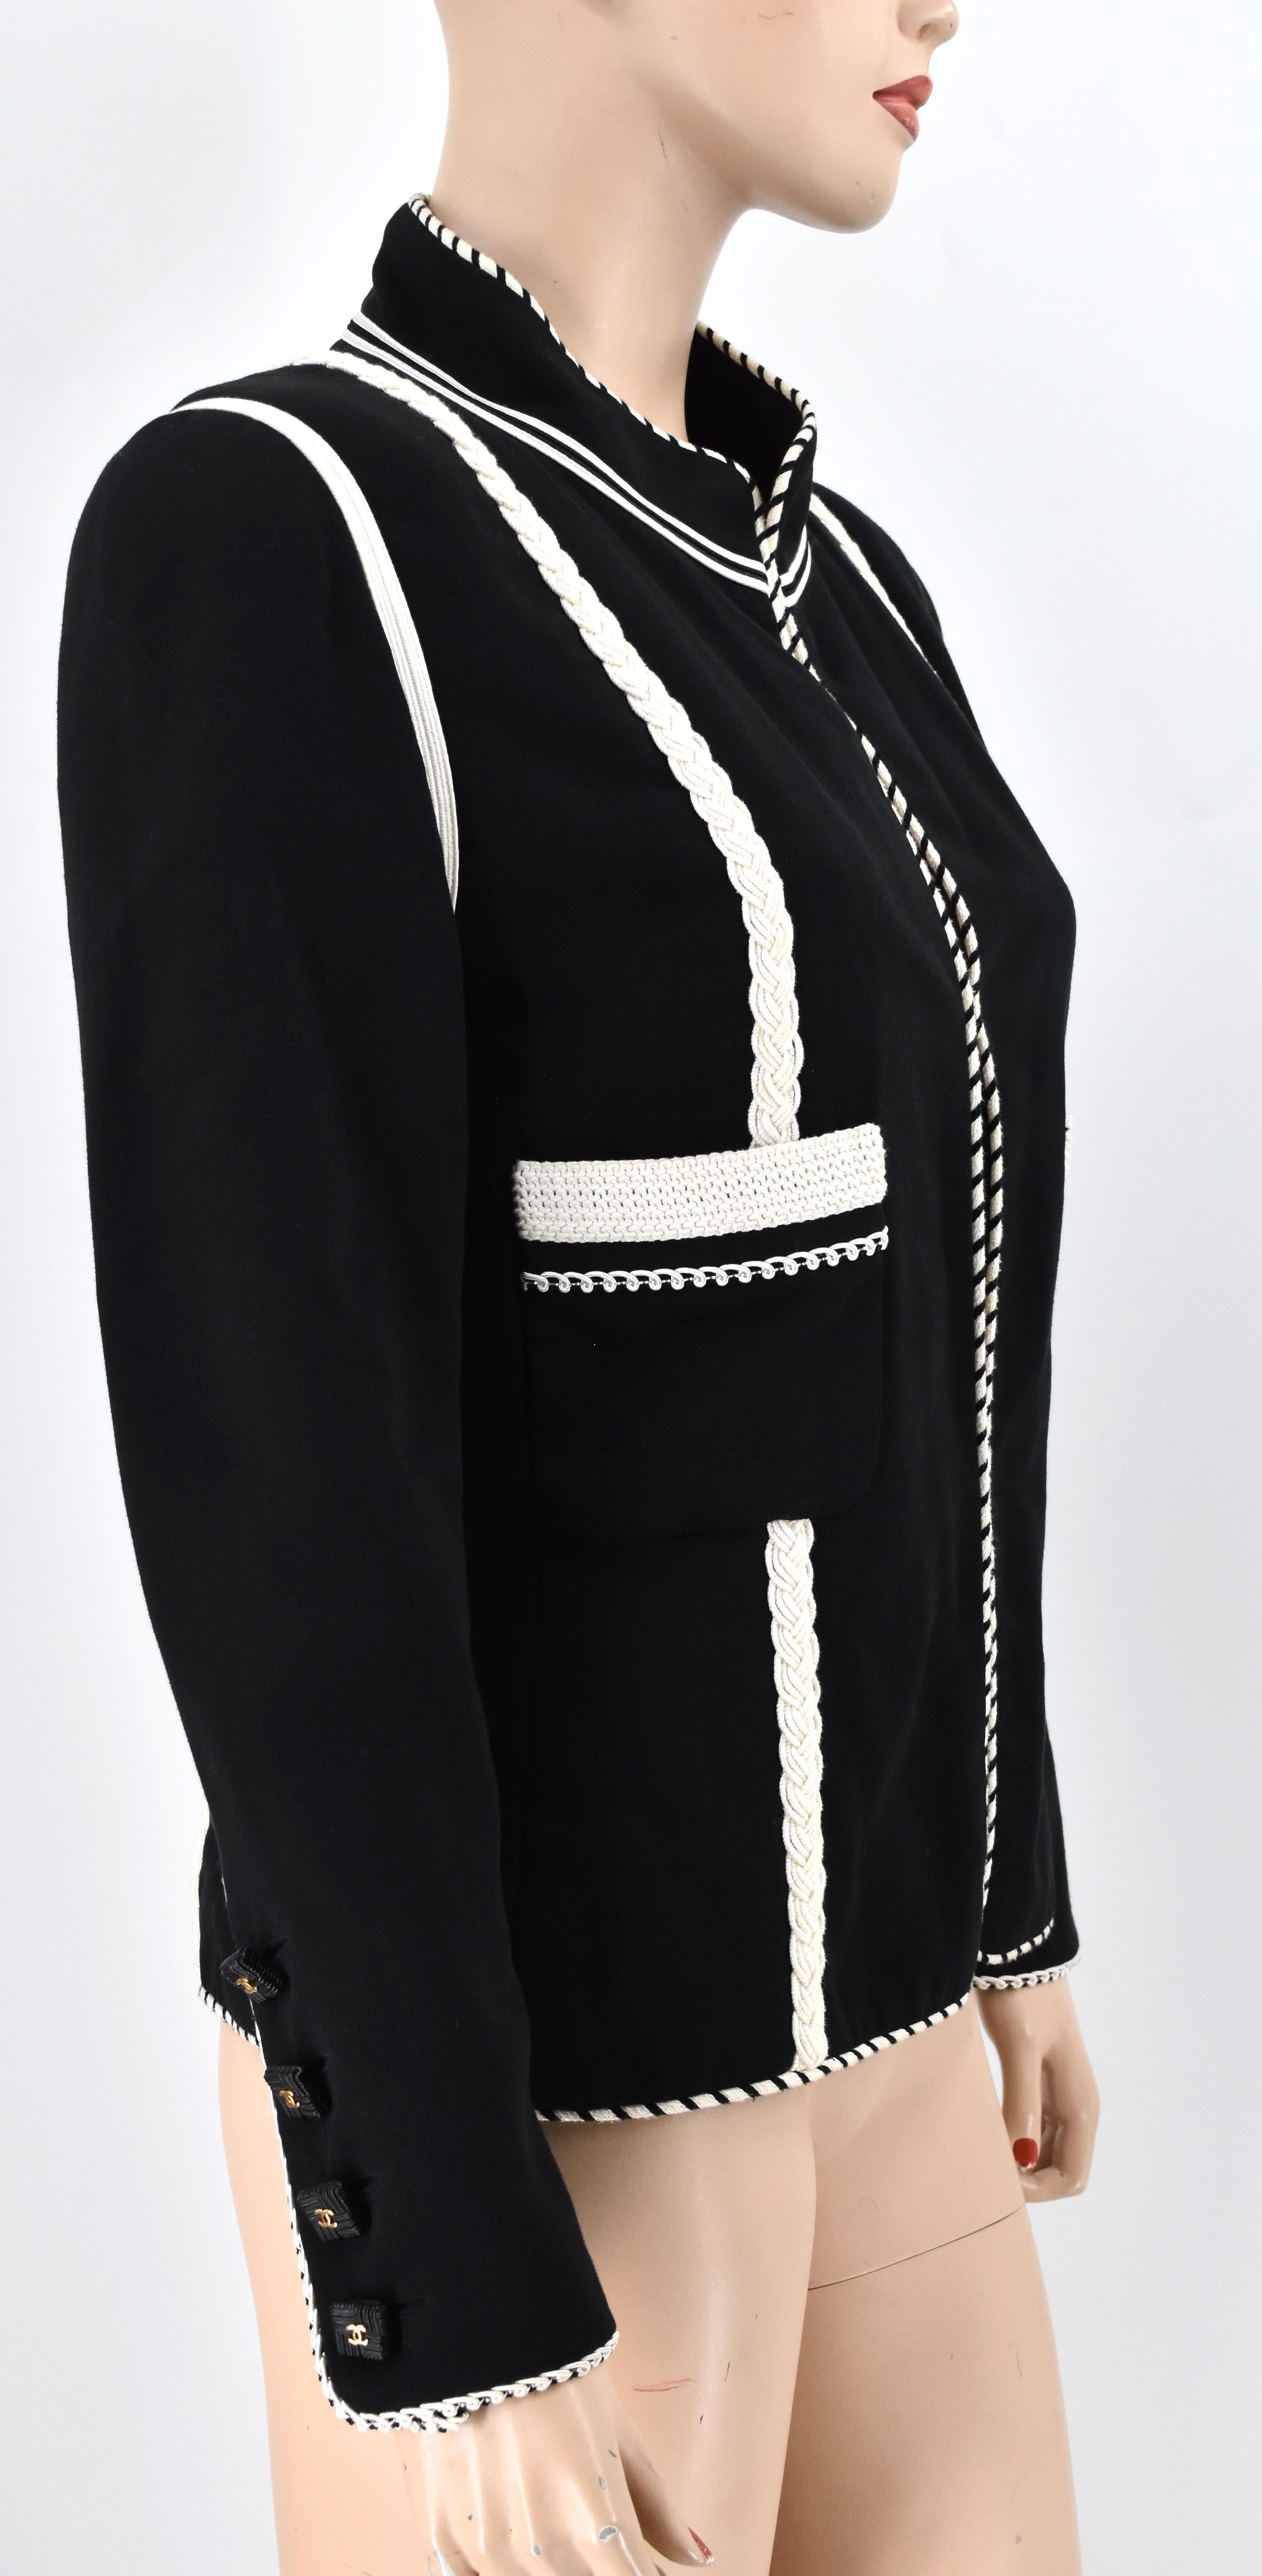 Chanel Boutique Runway Jacket in beautiful blend of black and white braided trim. It is adorned with Chanel interlocking Cc logo buttons. This is in excellent condition.